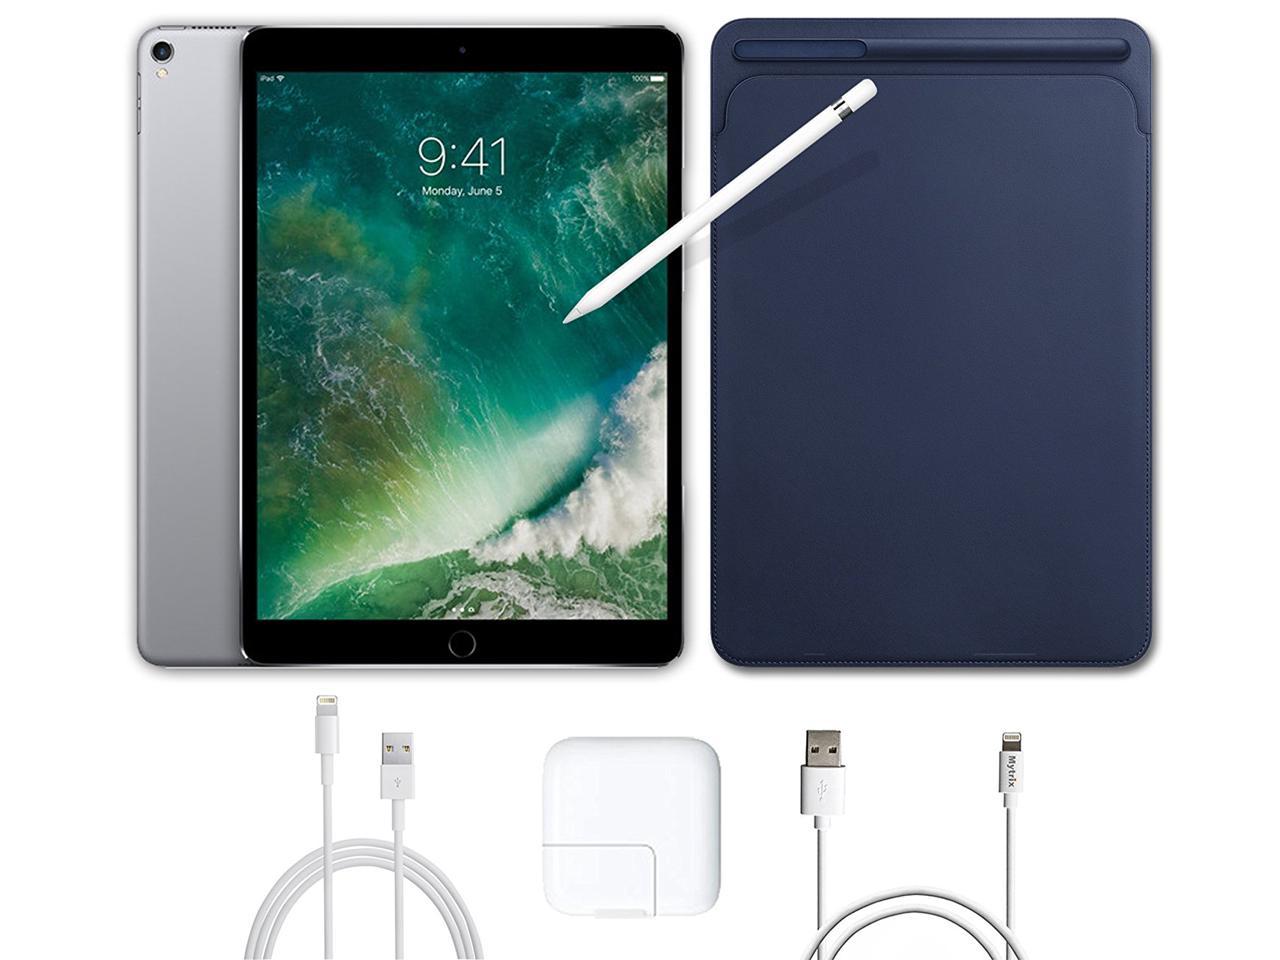 2017 New iPad Pro Bundle (4 Items): Apple 10.5 inch iPad Pro with Wi-Fi 512 GB Space Gray, Midnight Blue Leather Sleeve, Apple Pencil, and Mytrix USB Apple Lightning Cable